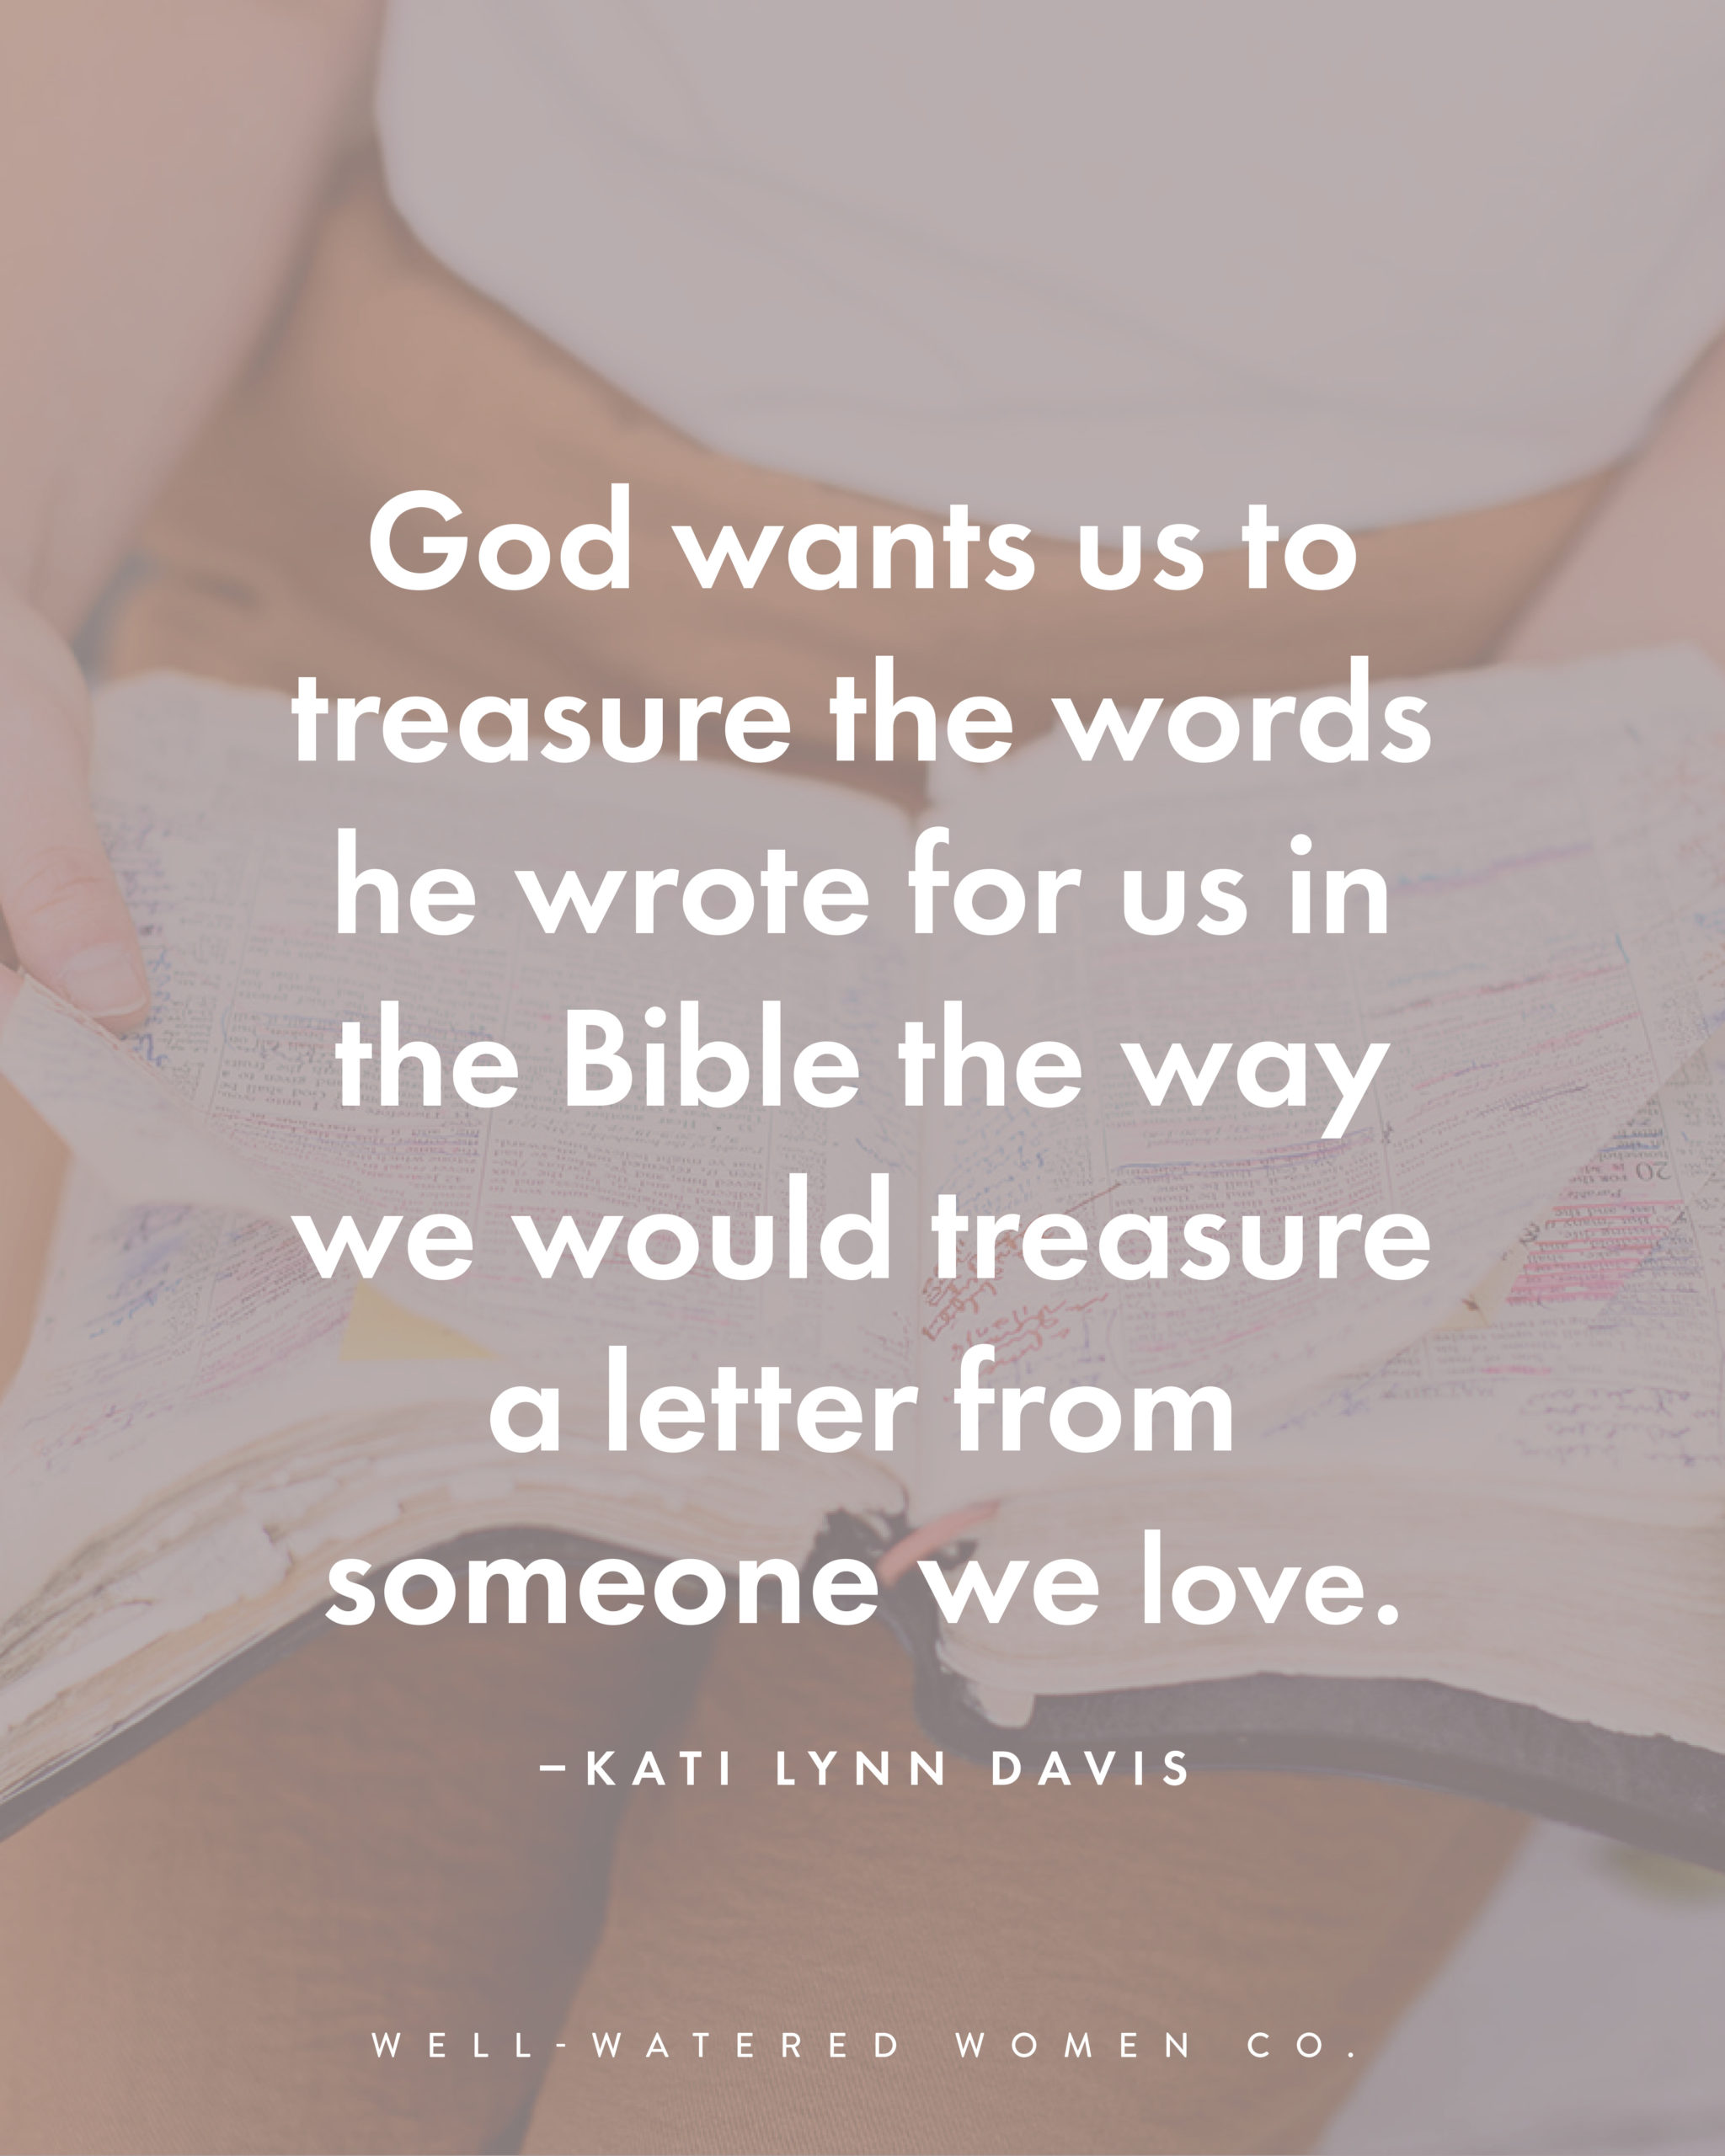 Scripture Memory in a World of Easy Access - an article from Well-Watered Women - quote